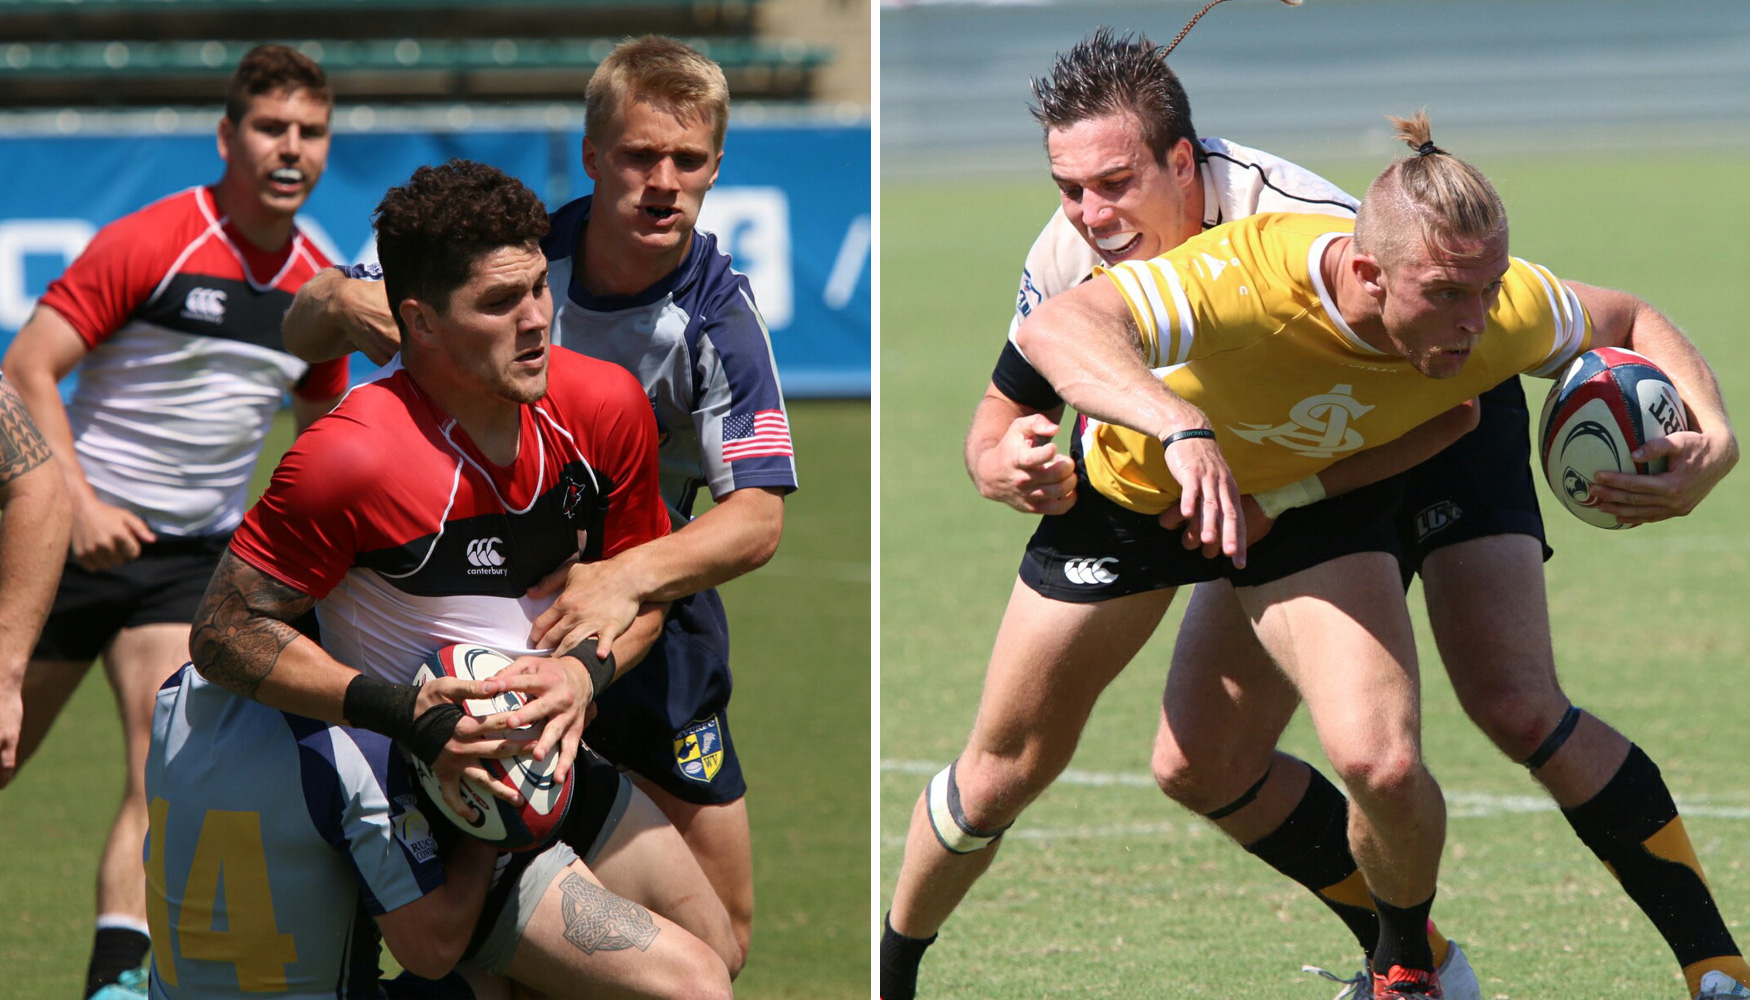 USA College 7s: College 7s 2016: Day Two, Division I